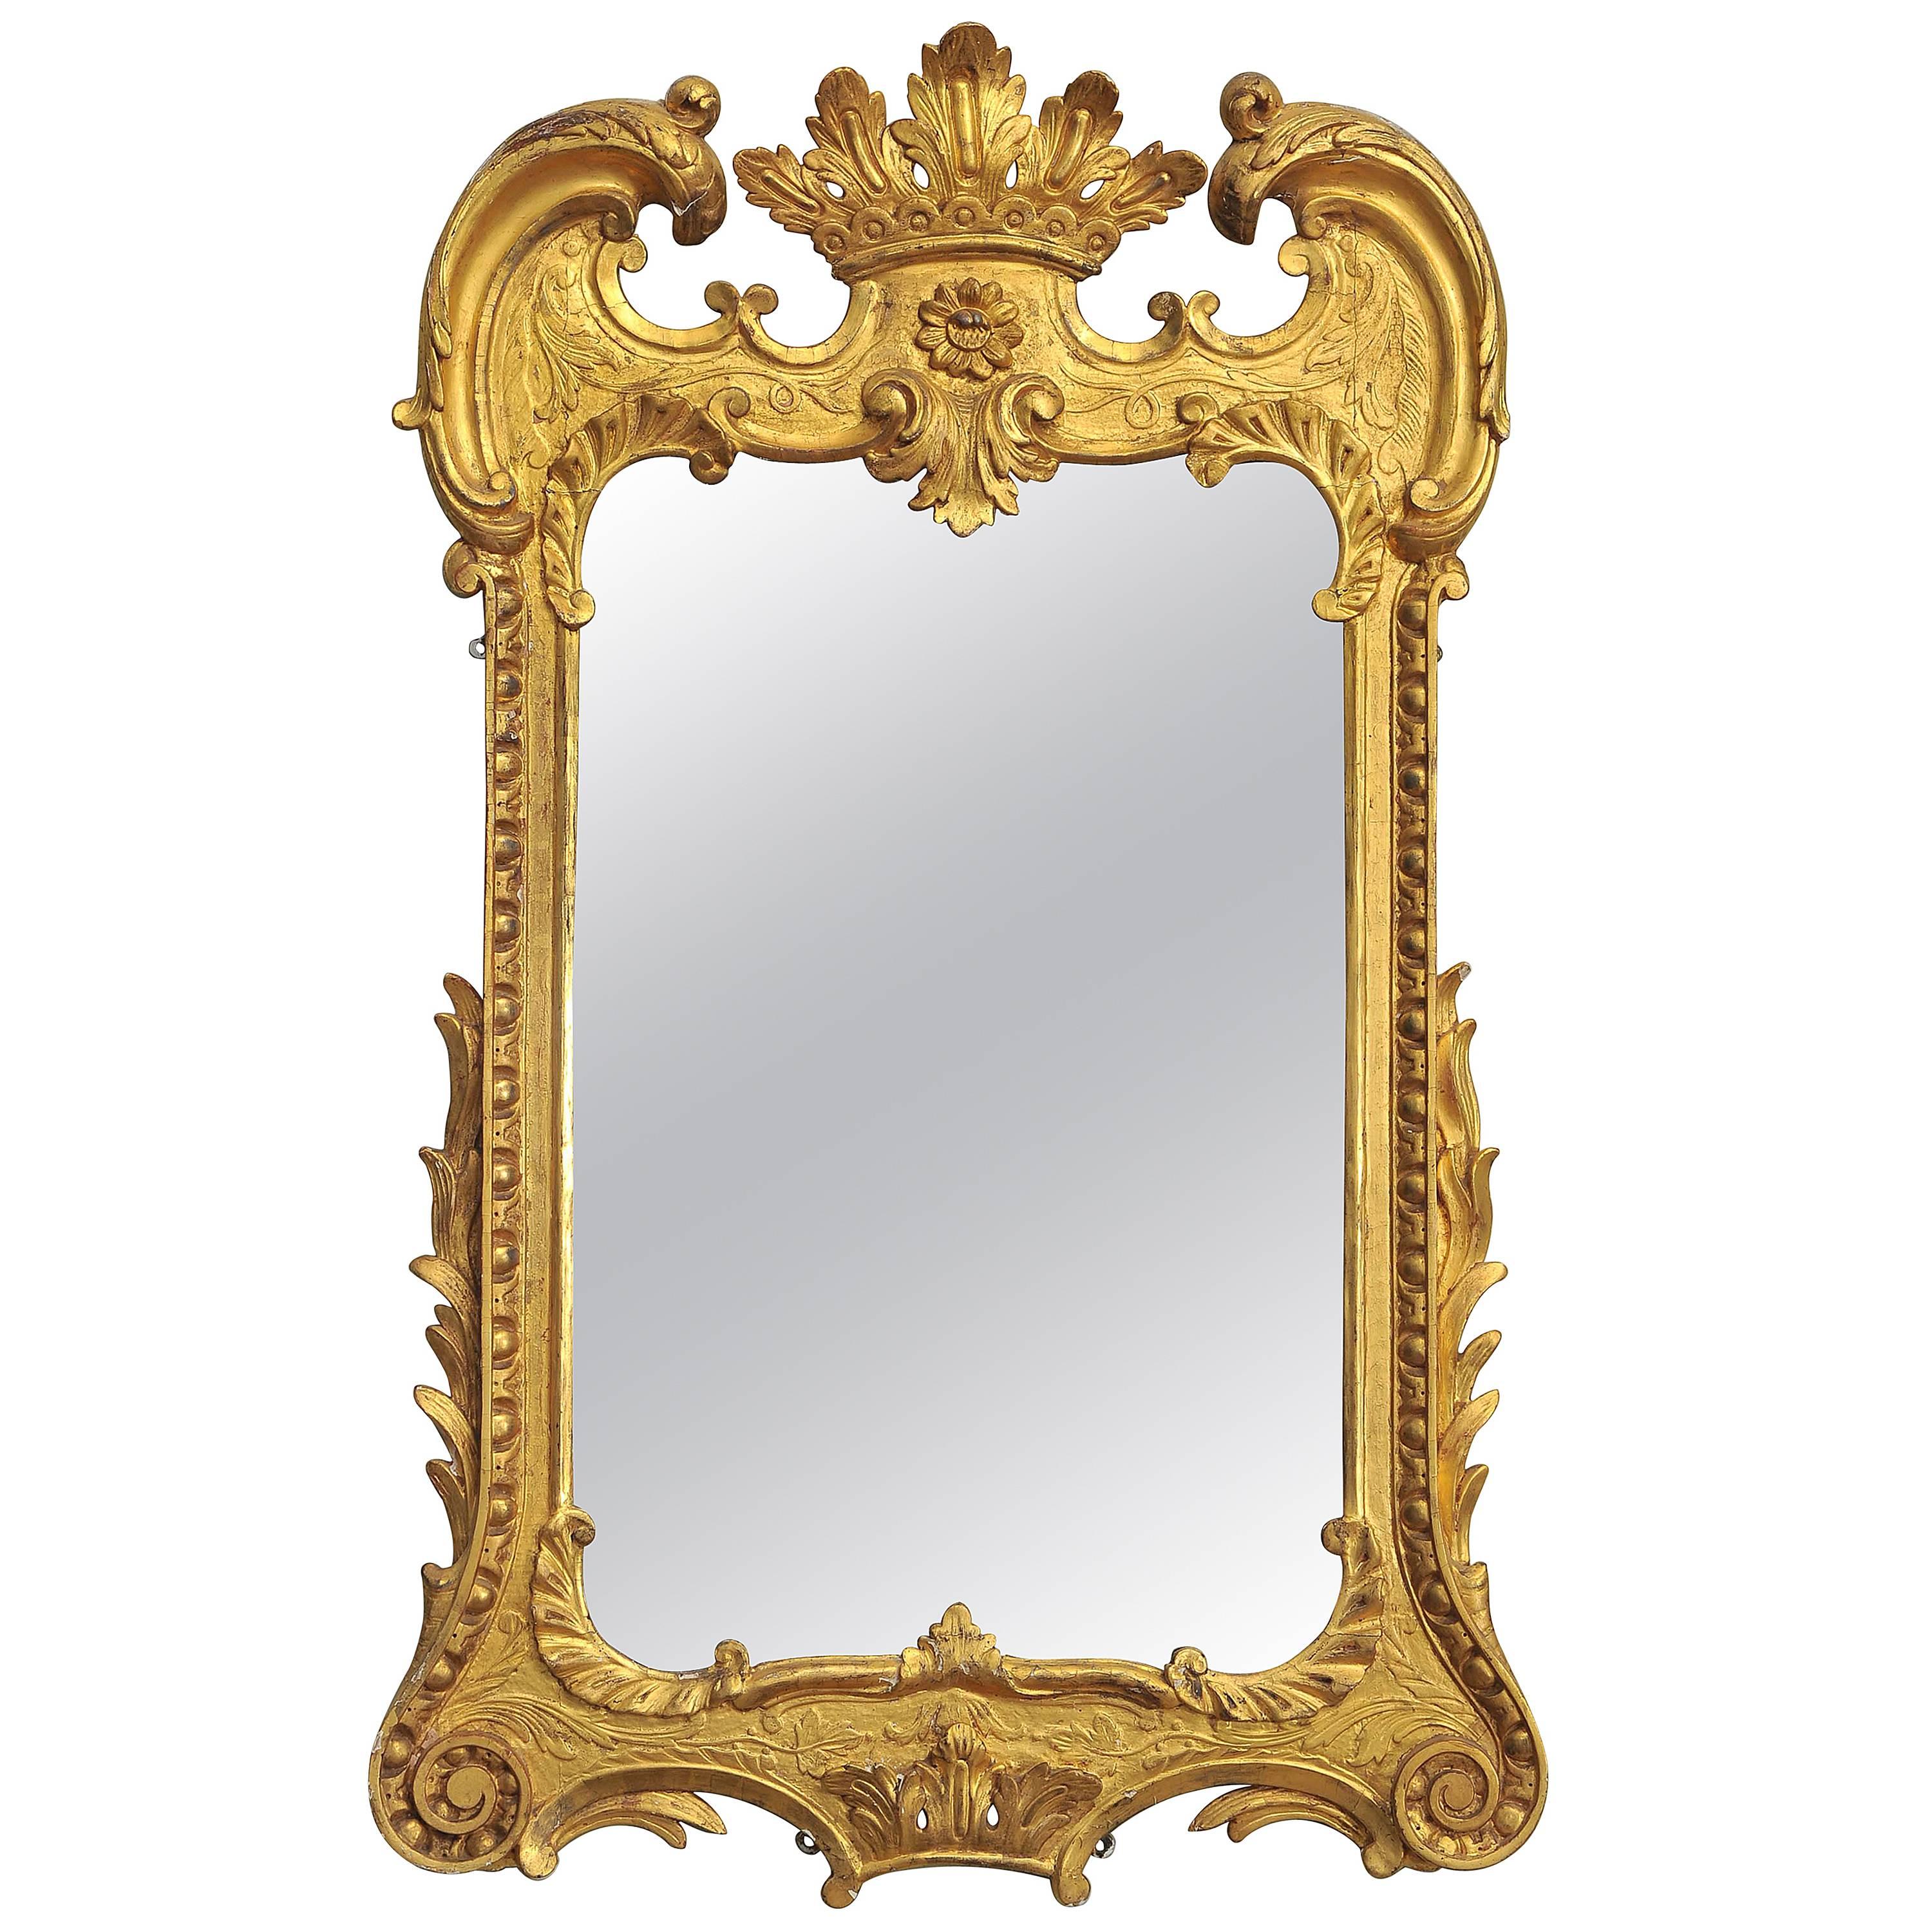 Unusual 18th Century Carved Giltwood Wall Mirror